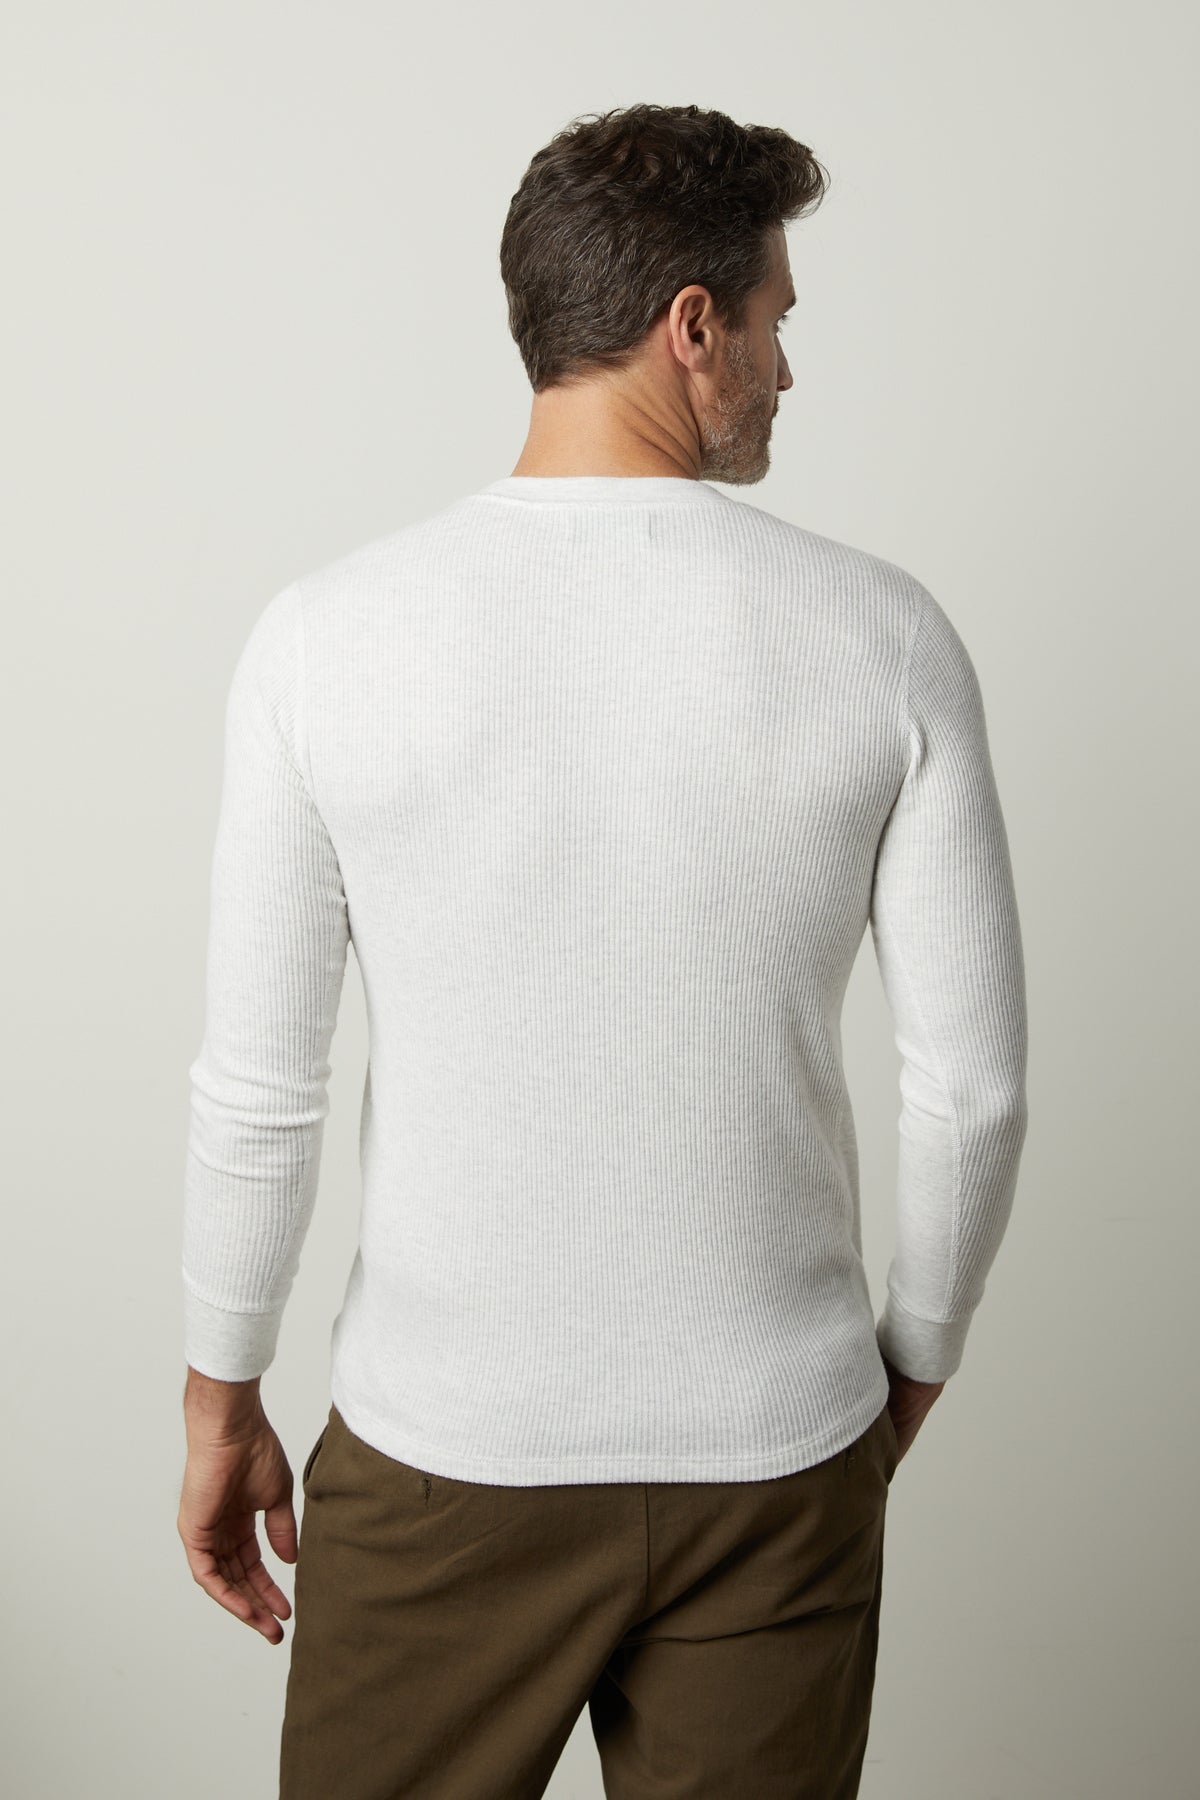 The back view of a man wearing a Velvet by Graham & Spencer AUGUSTUS RIB KNIT CREW white long - sleeved shirt.-26827671404737